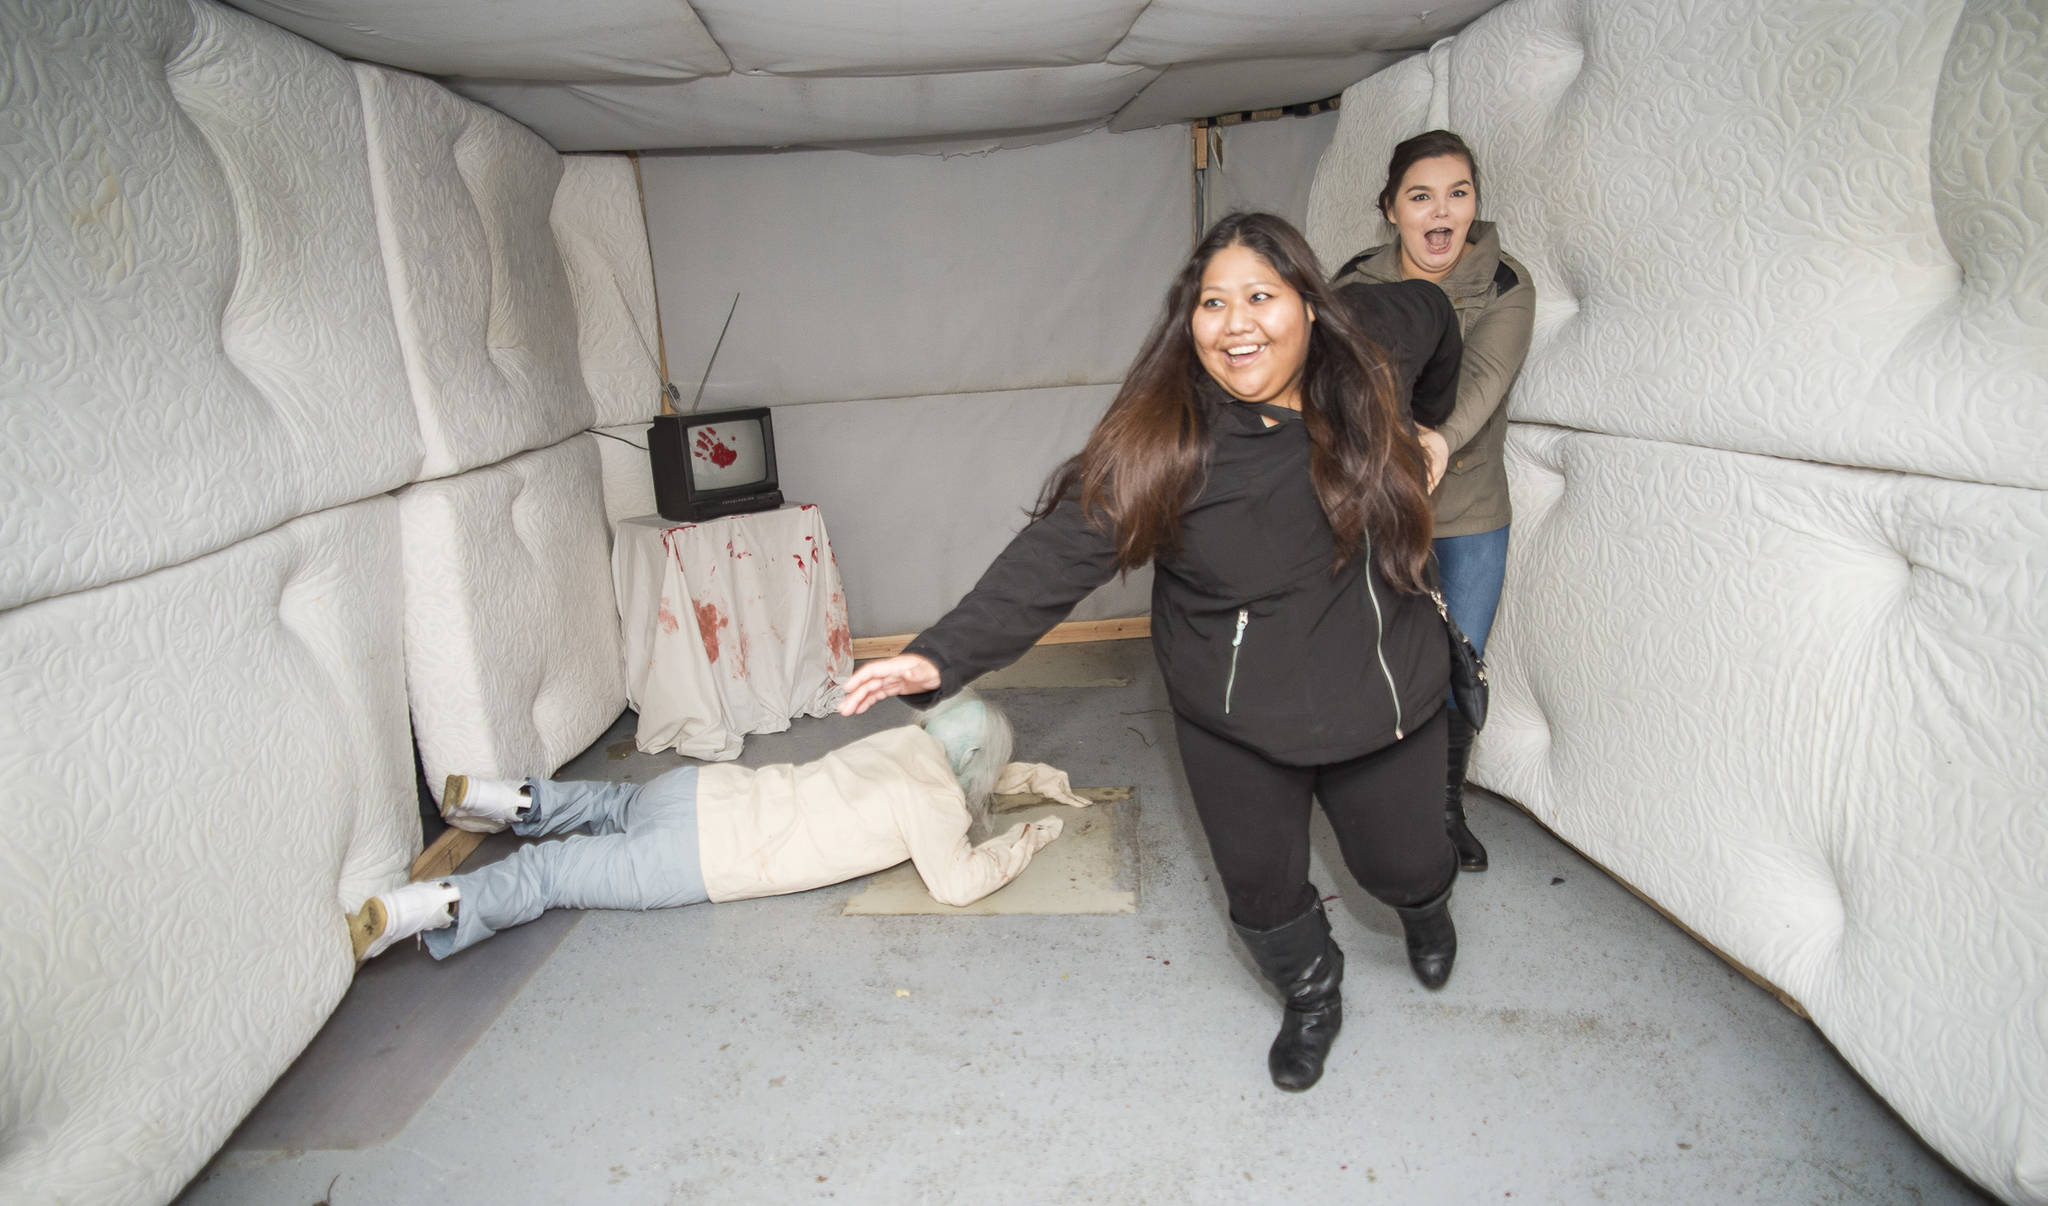 Juneau residents react to scares and chills as they make their way through the Haunted Station at the U.S. Coast Guard’s Station Juneau on Friday, Oct. 26, 2018. Station personnel pay for all the decoration themselves and take three weeks to ready the station. Entry is non perishable food items for the Southeast Alaska Food Bank. (Michael Penn | Juneau Empire)